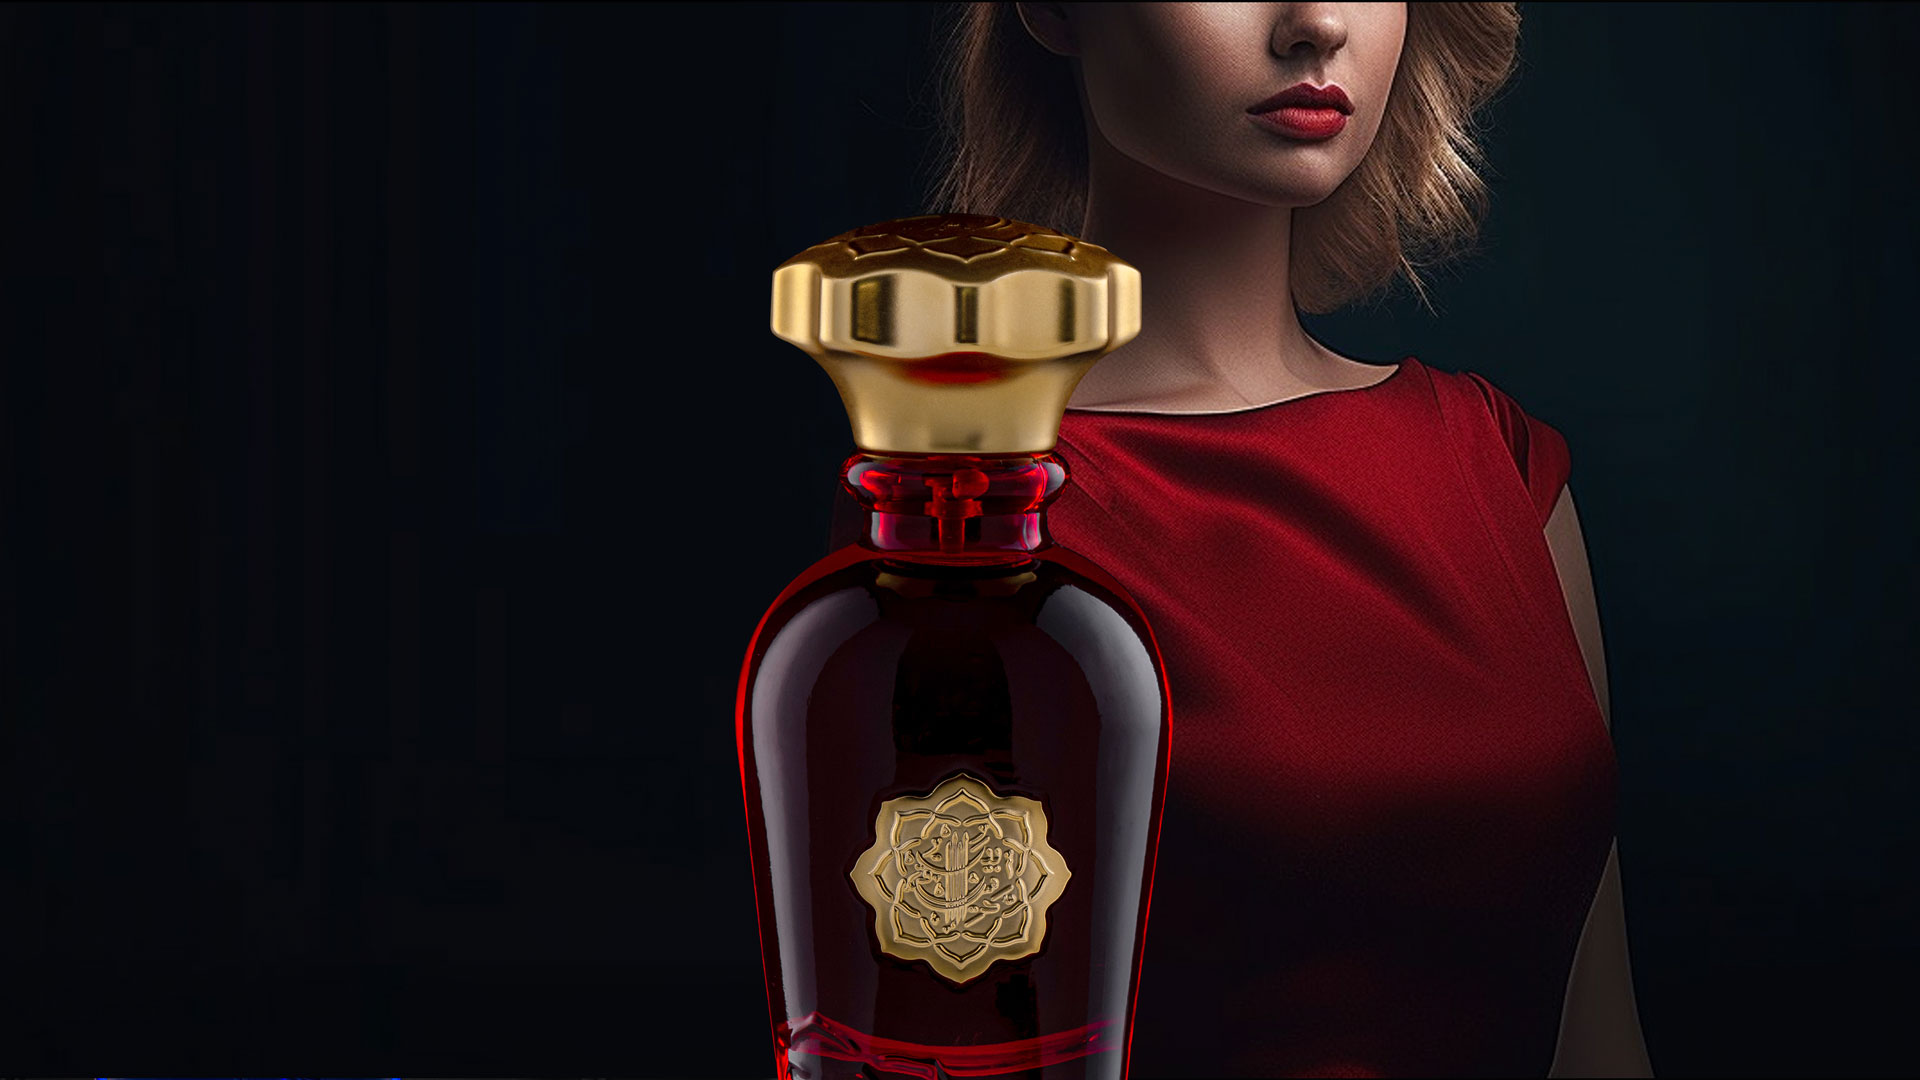 Achieve Elegance with Our First-Copy Penhaligon's Women's Perfumes